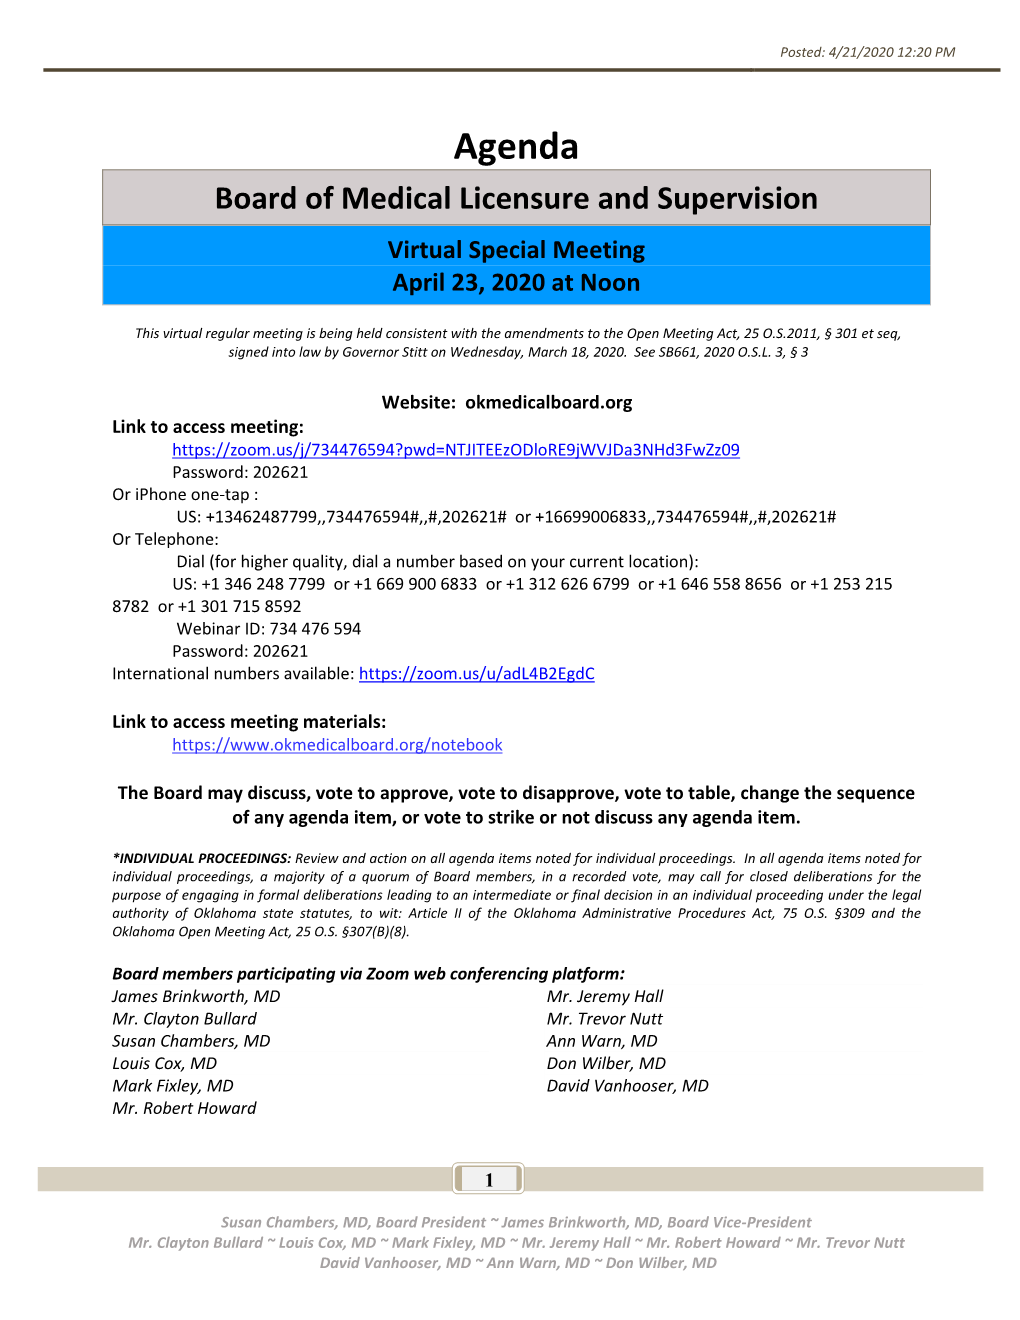 Agenda Board of Medical Licensure and Supervision Virtual Special Meeting April 23, 2020 at Noon